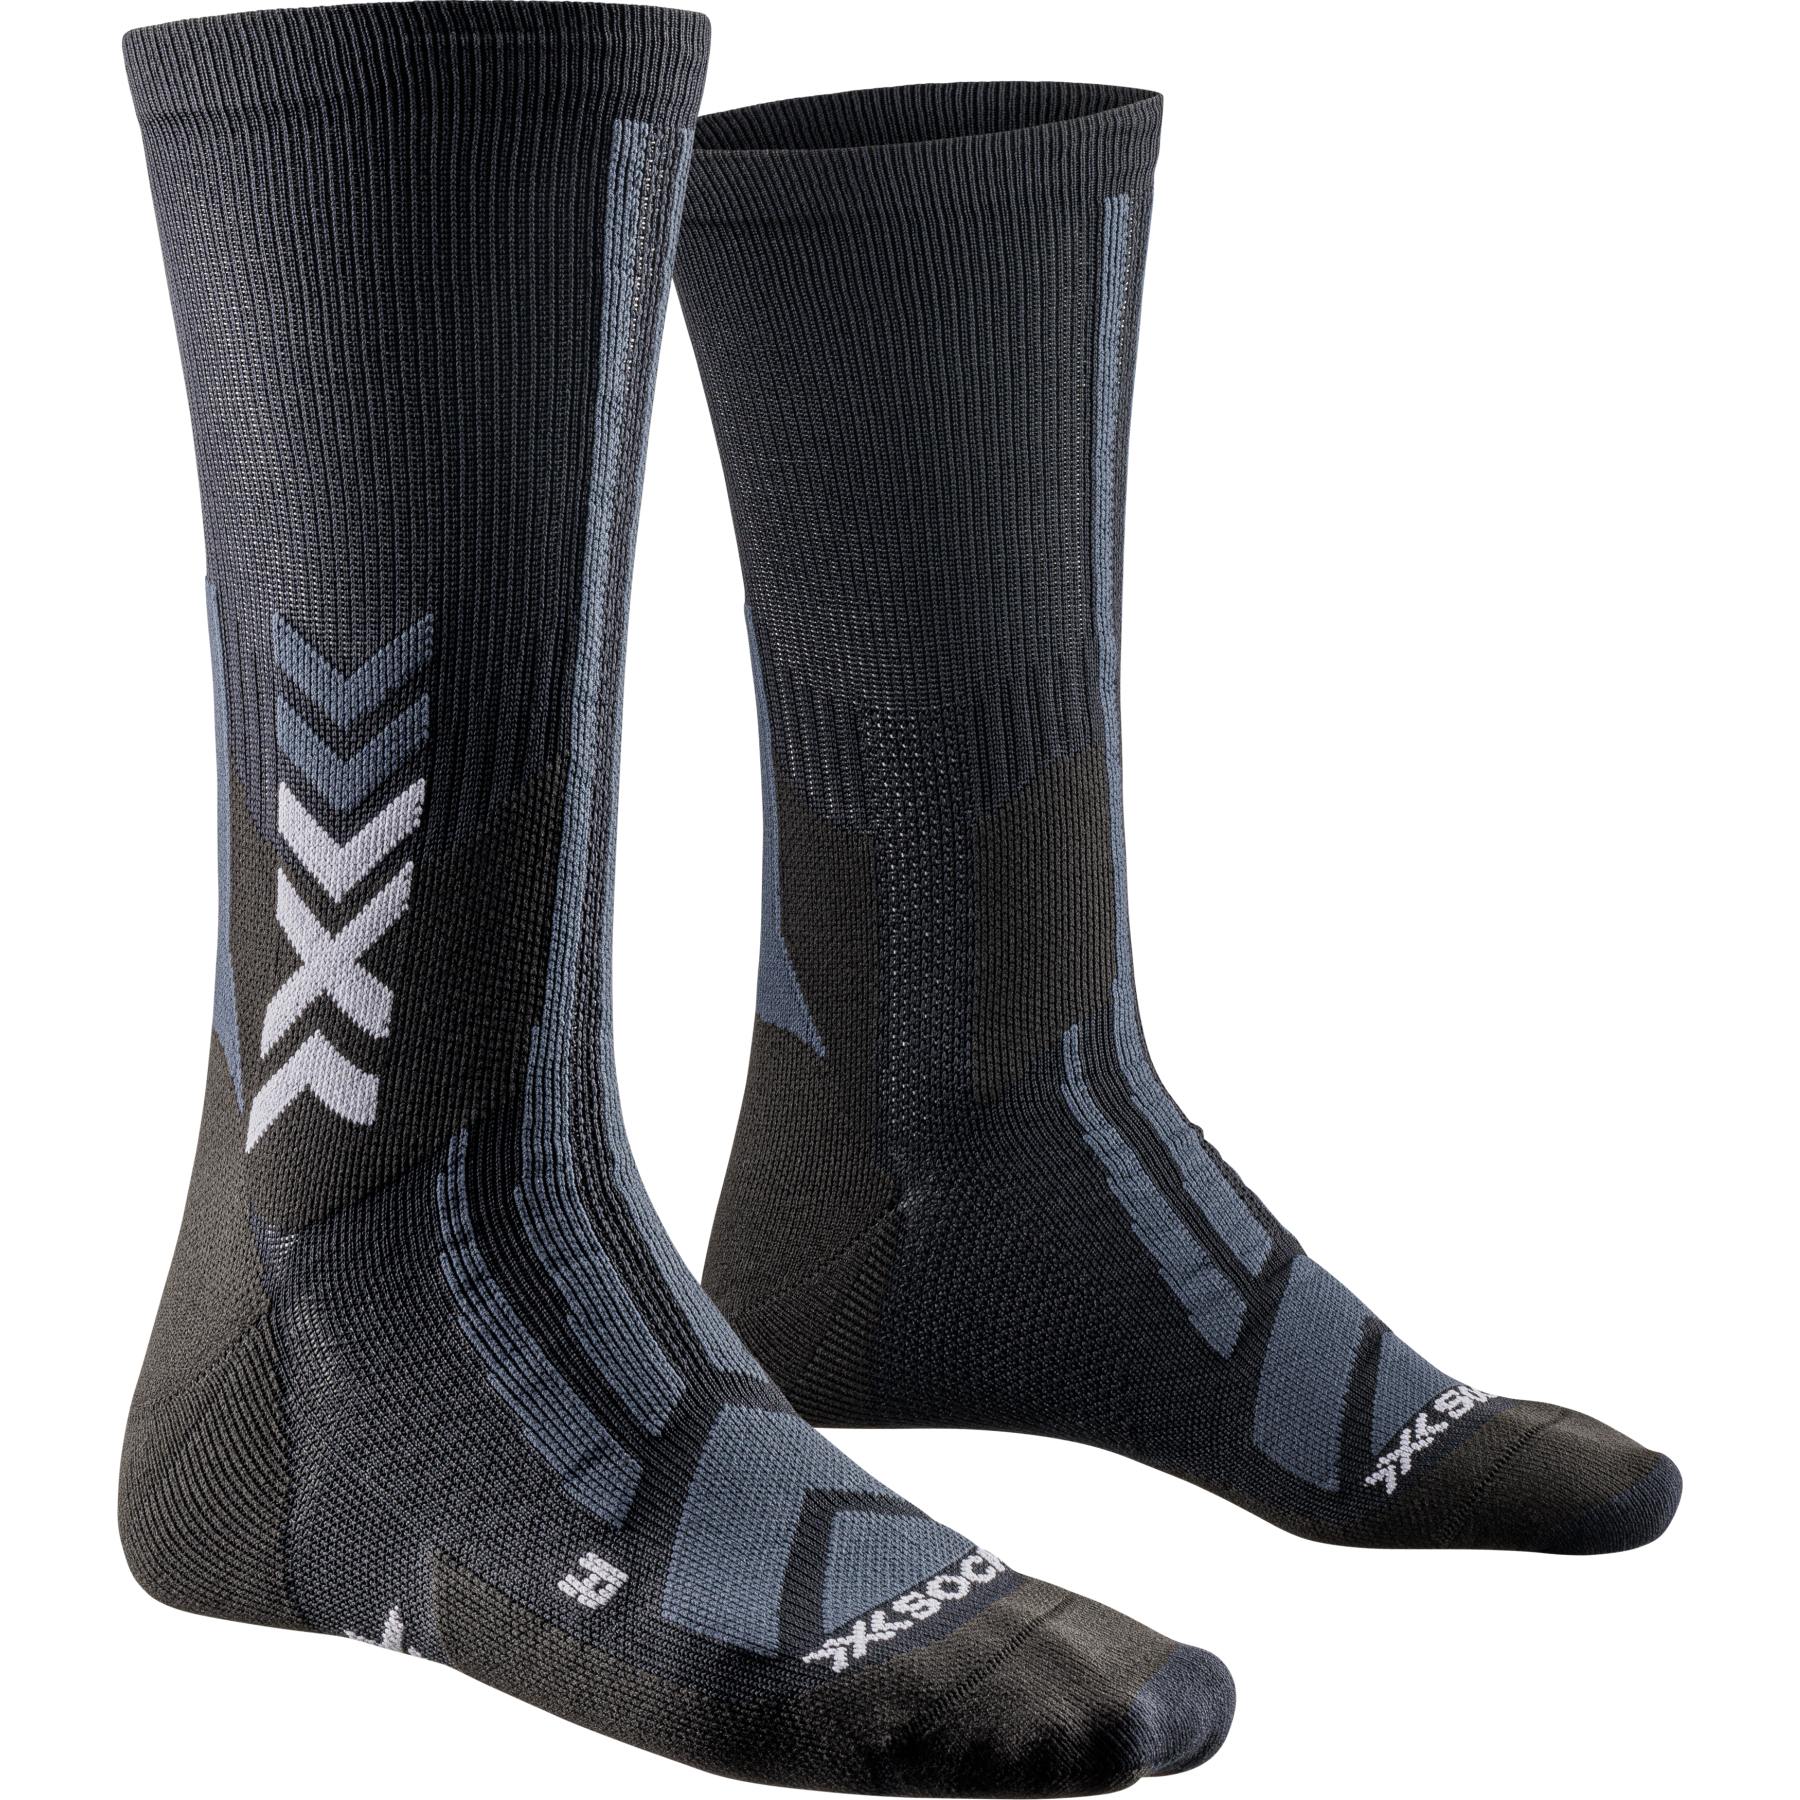 Picture of X-Socks Hike Discover Crew Socks - black/charcoal